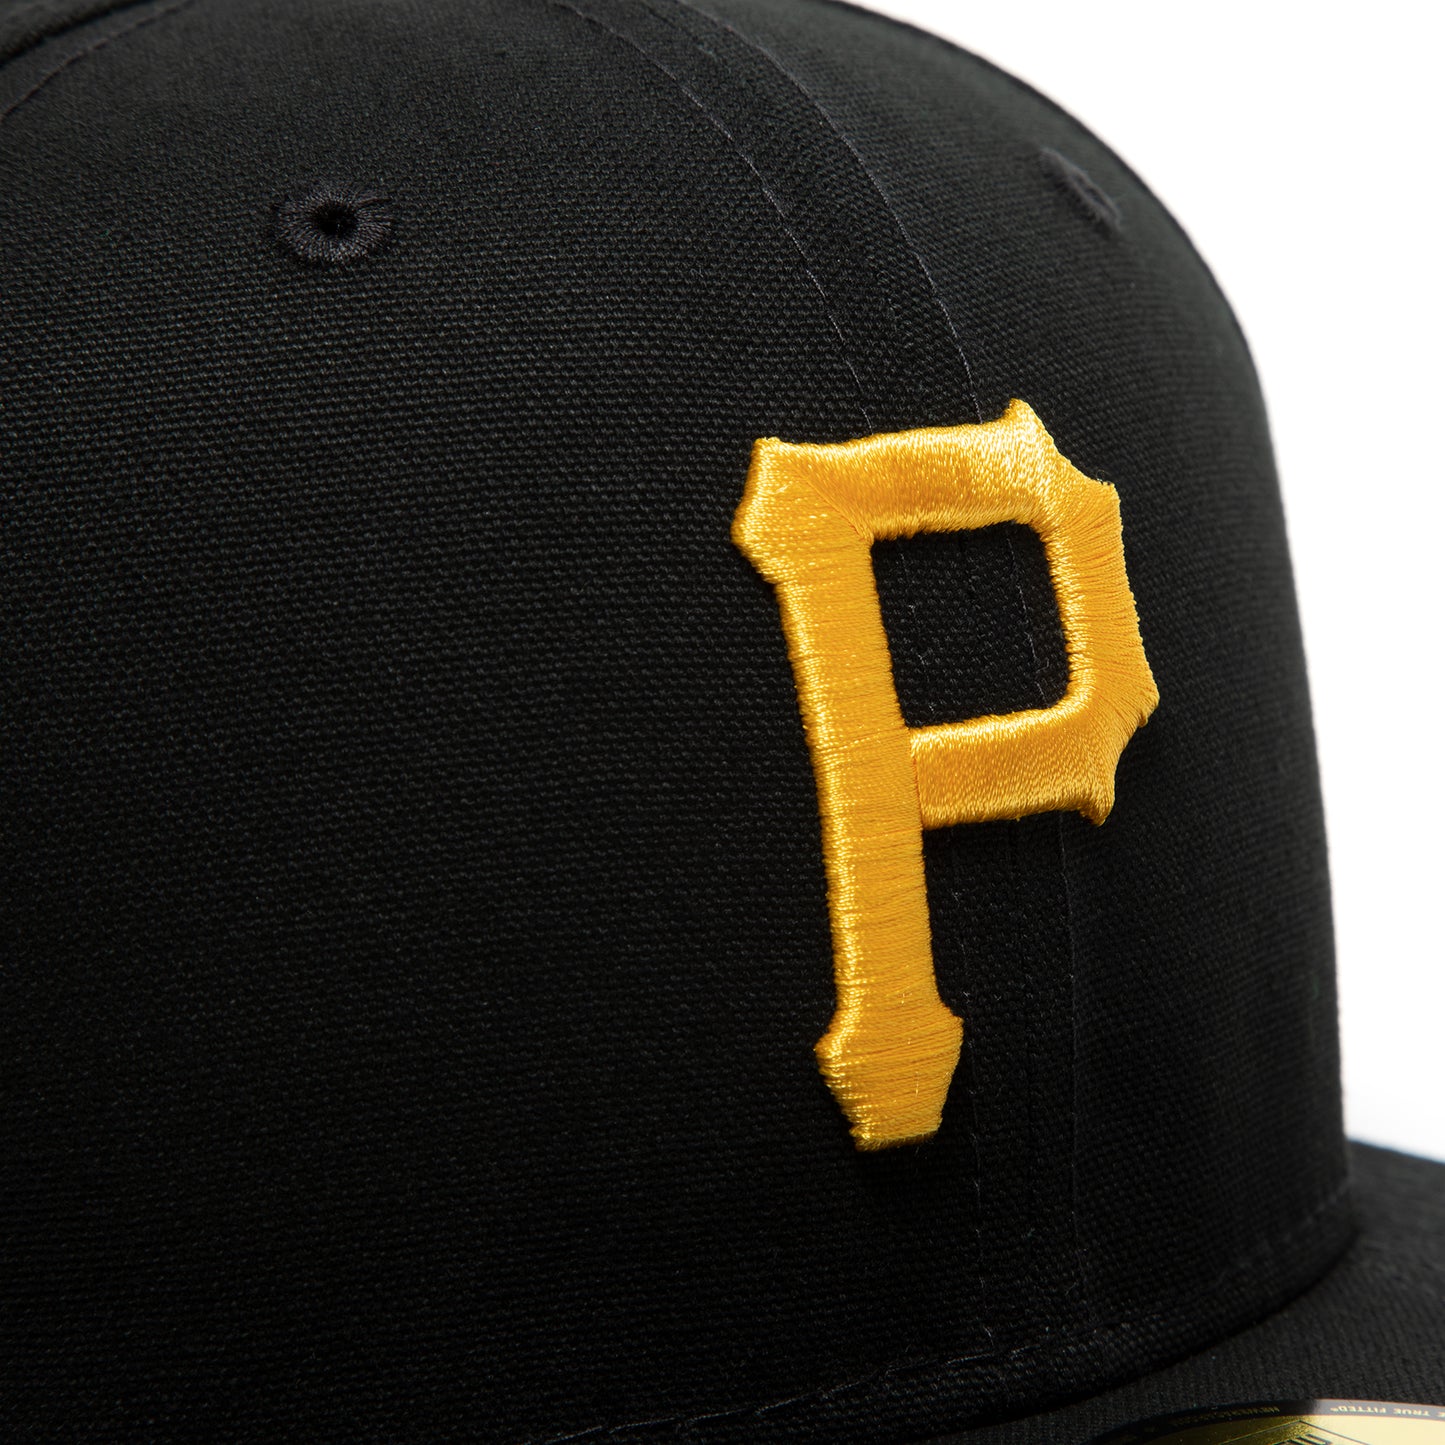 New Era x Eric Emanuel Pittsburgh Pirates Fitted Hat (Black)